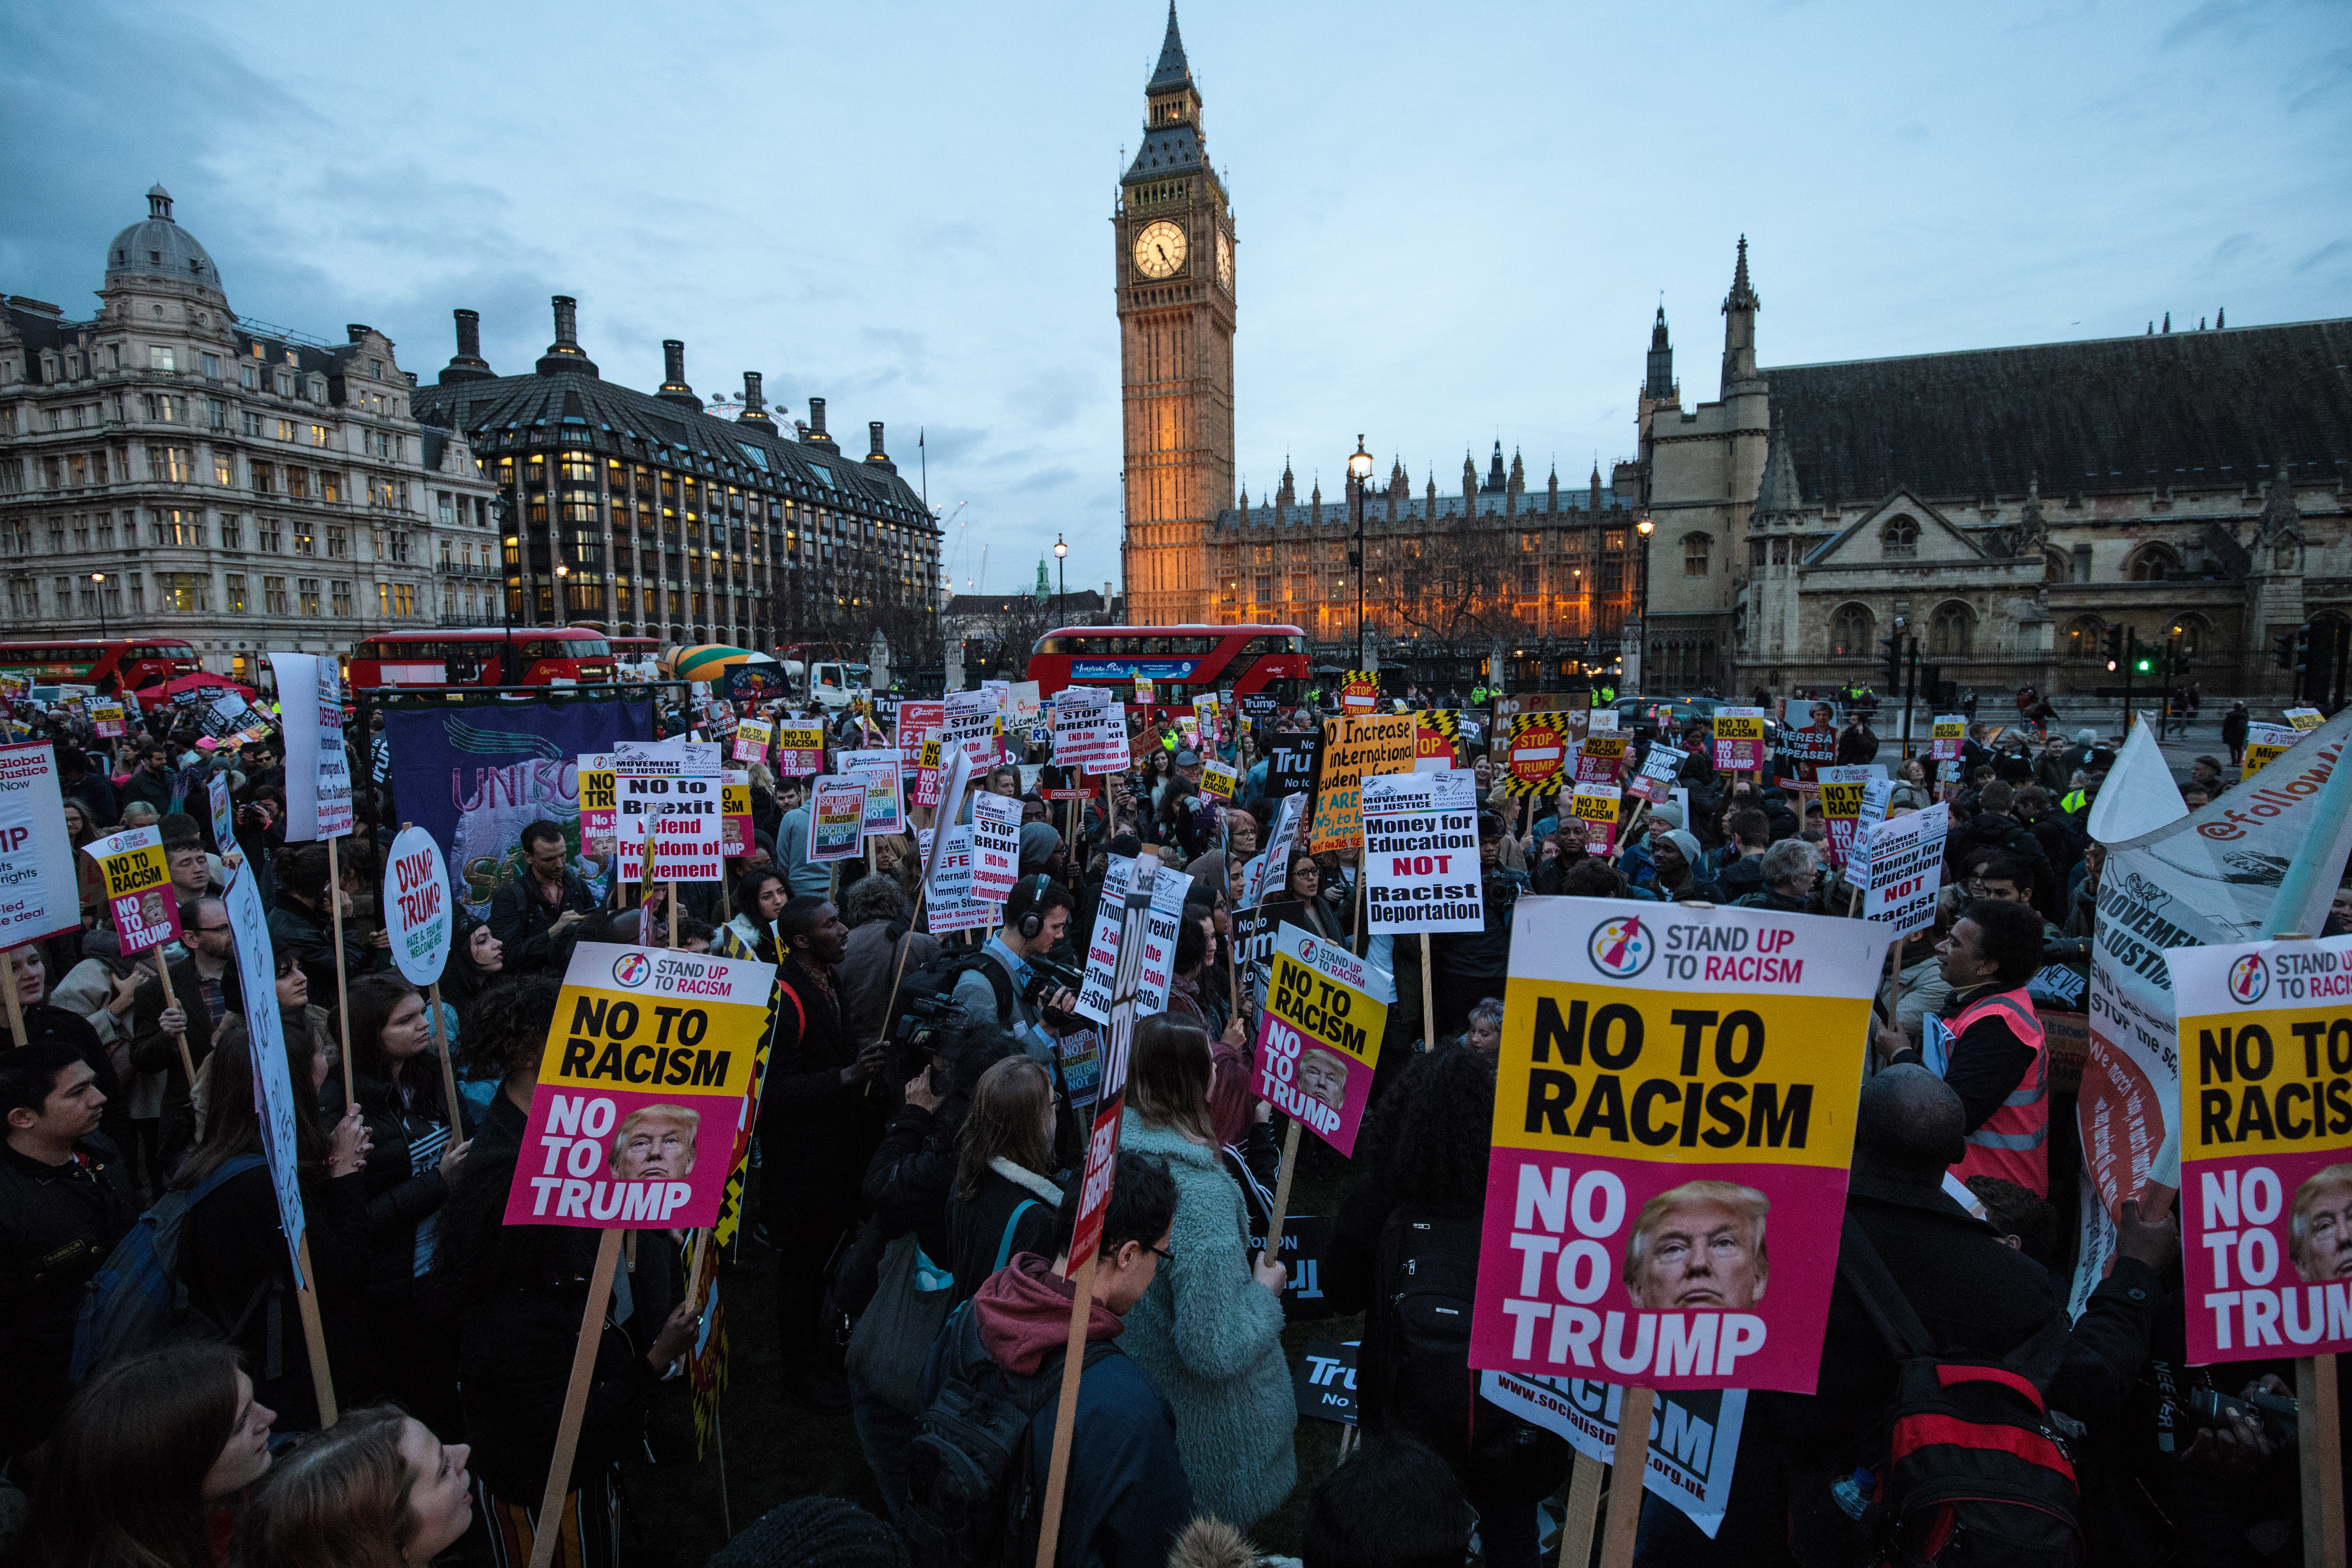 Protesters holding placards take part in a rally in Parliament Square against U.S. president Donald Trump's state visit to the UK on February 20, 2017 in London, England. (Jack Taylor—Getty Images)